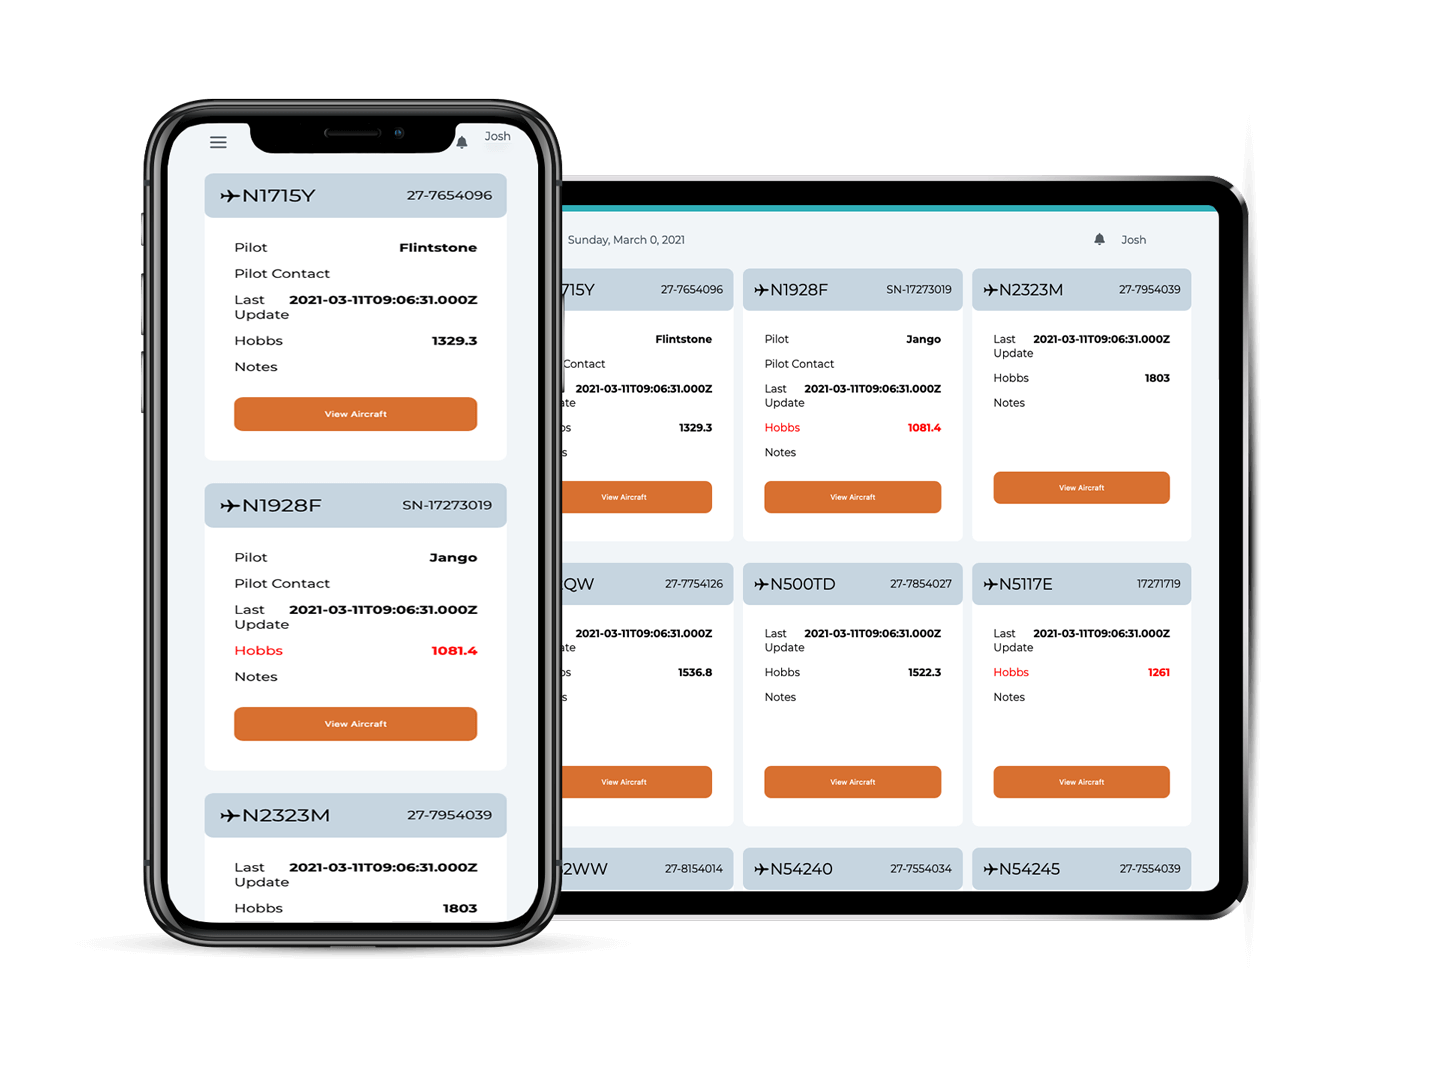 Database and API architected using Sequelize. Mobile application for maintenance built and served on the app store